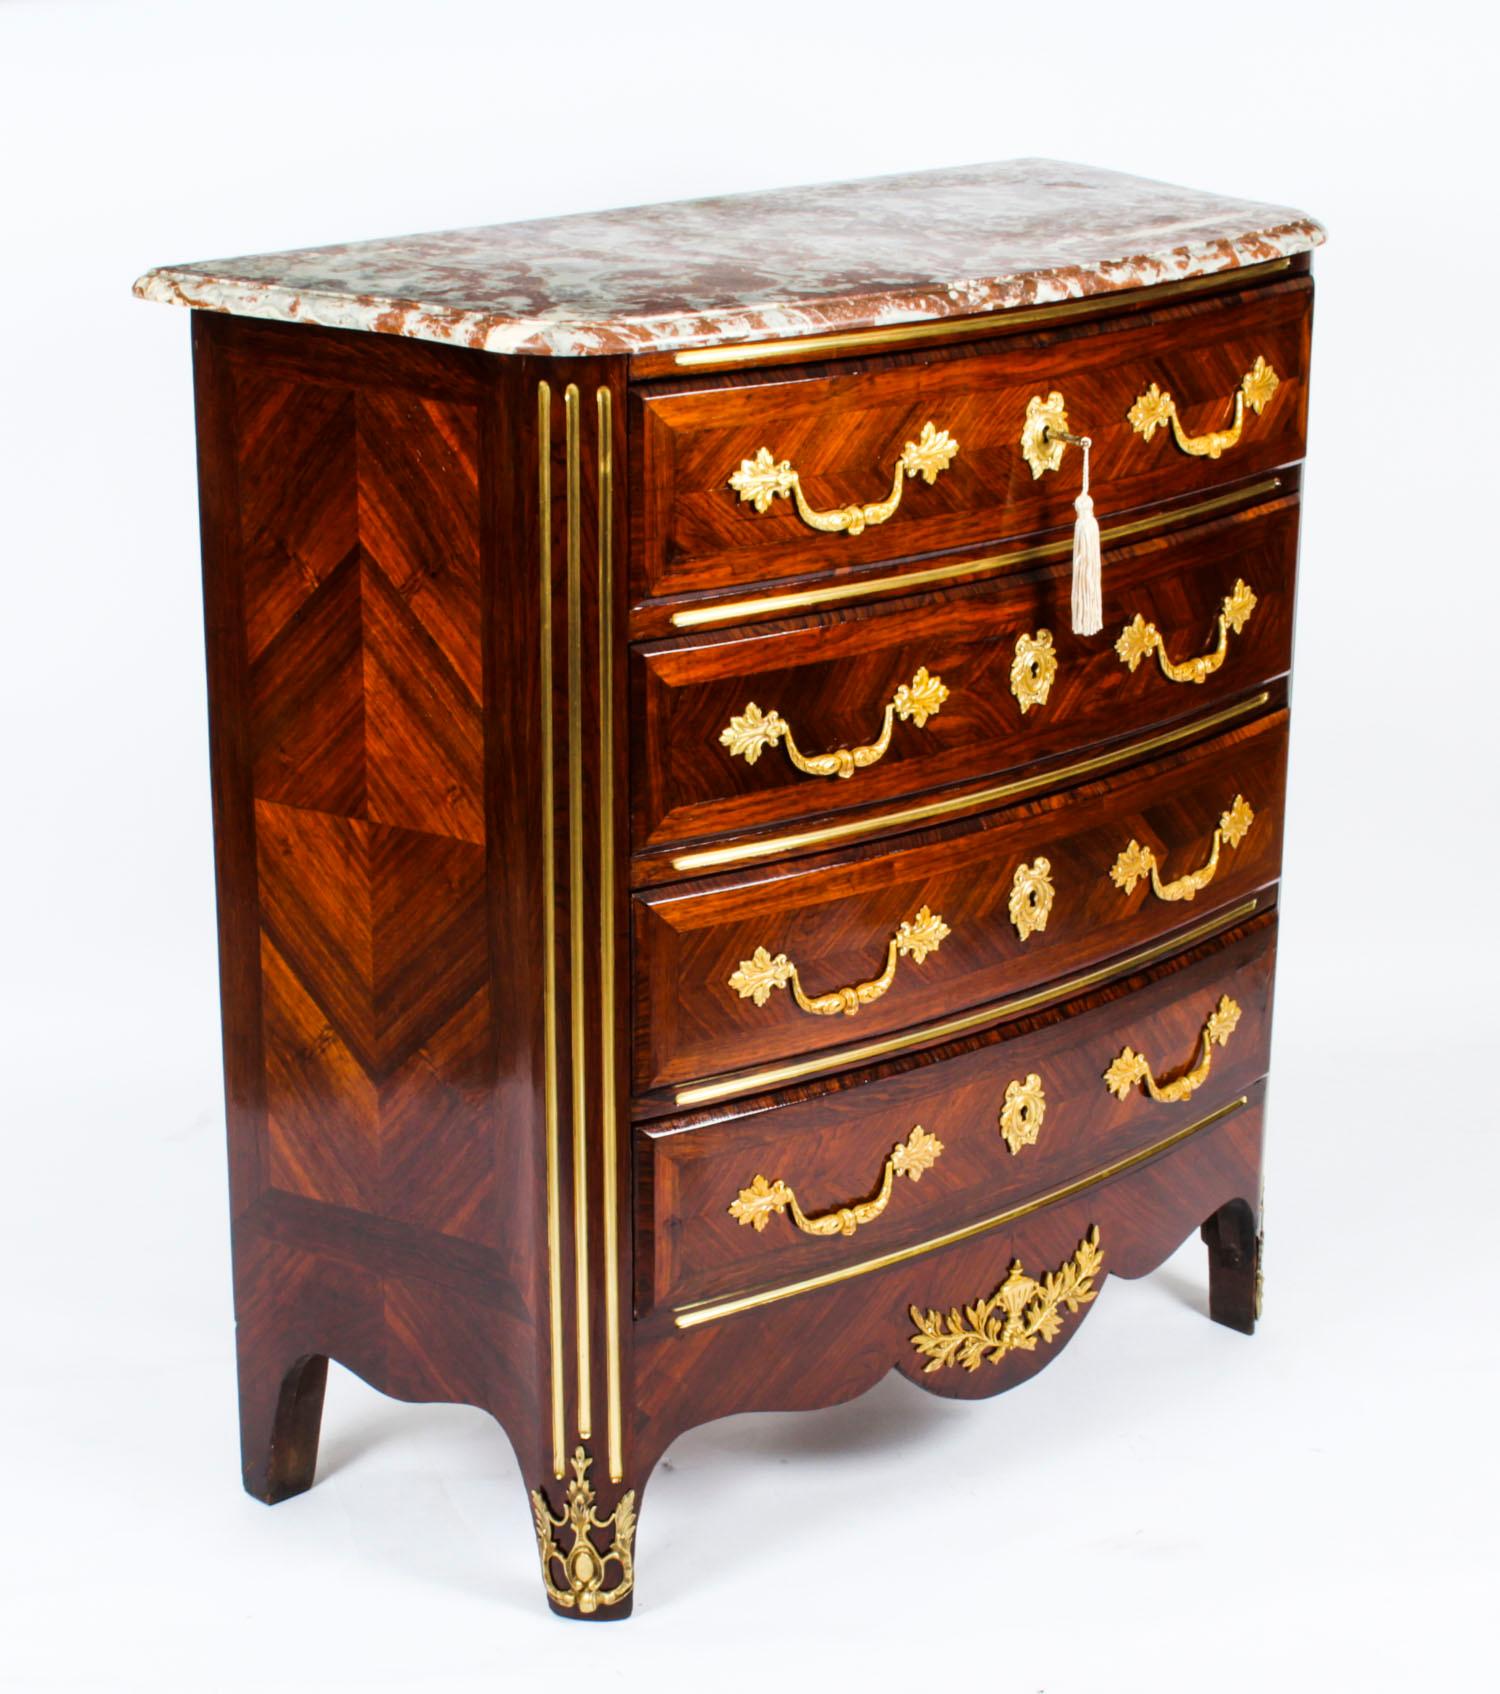 Antique Marble Topped Ormolu-Mounted Goncalo Alves Commode Chest, 19th Century 12